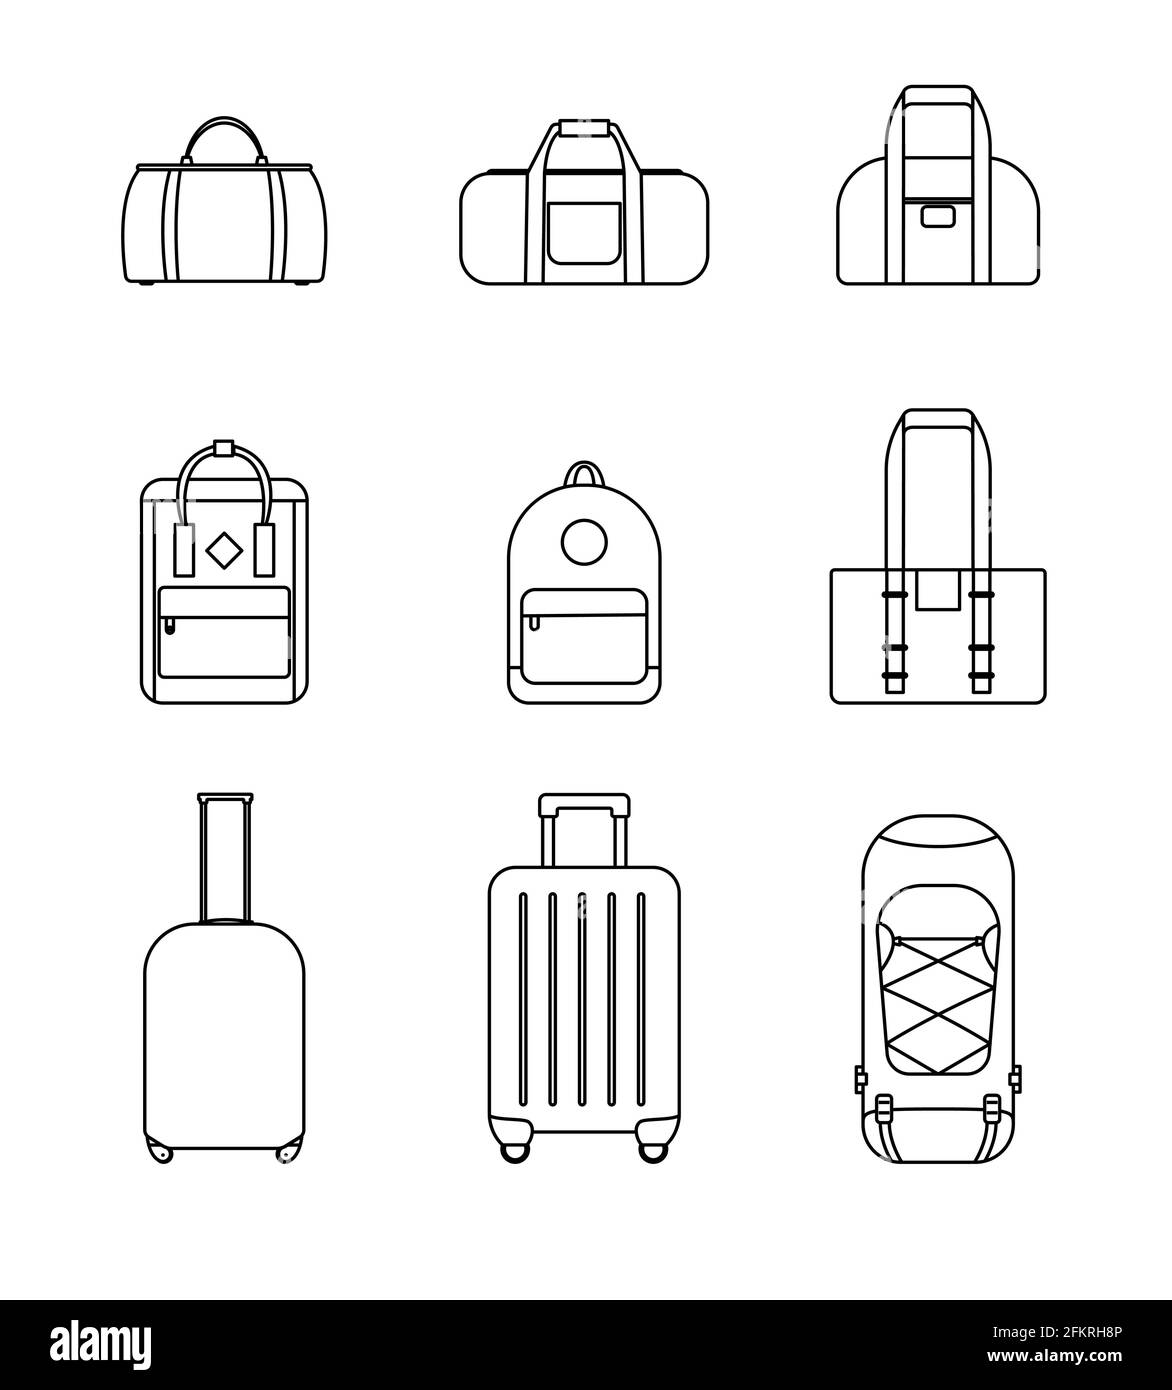 Icon collection set of travel bags, backpacks, suitcases isolated on white background Stock Vector